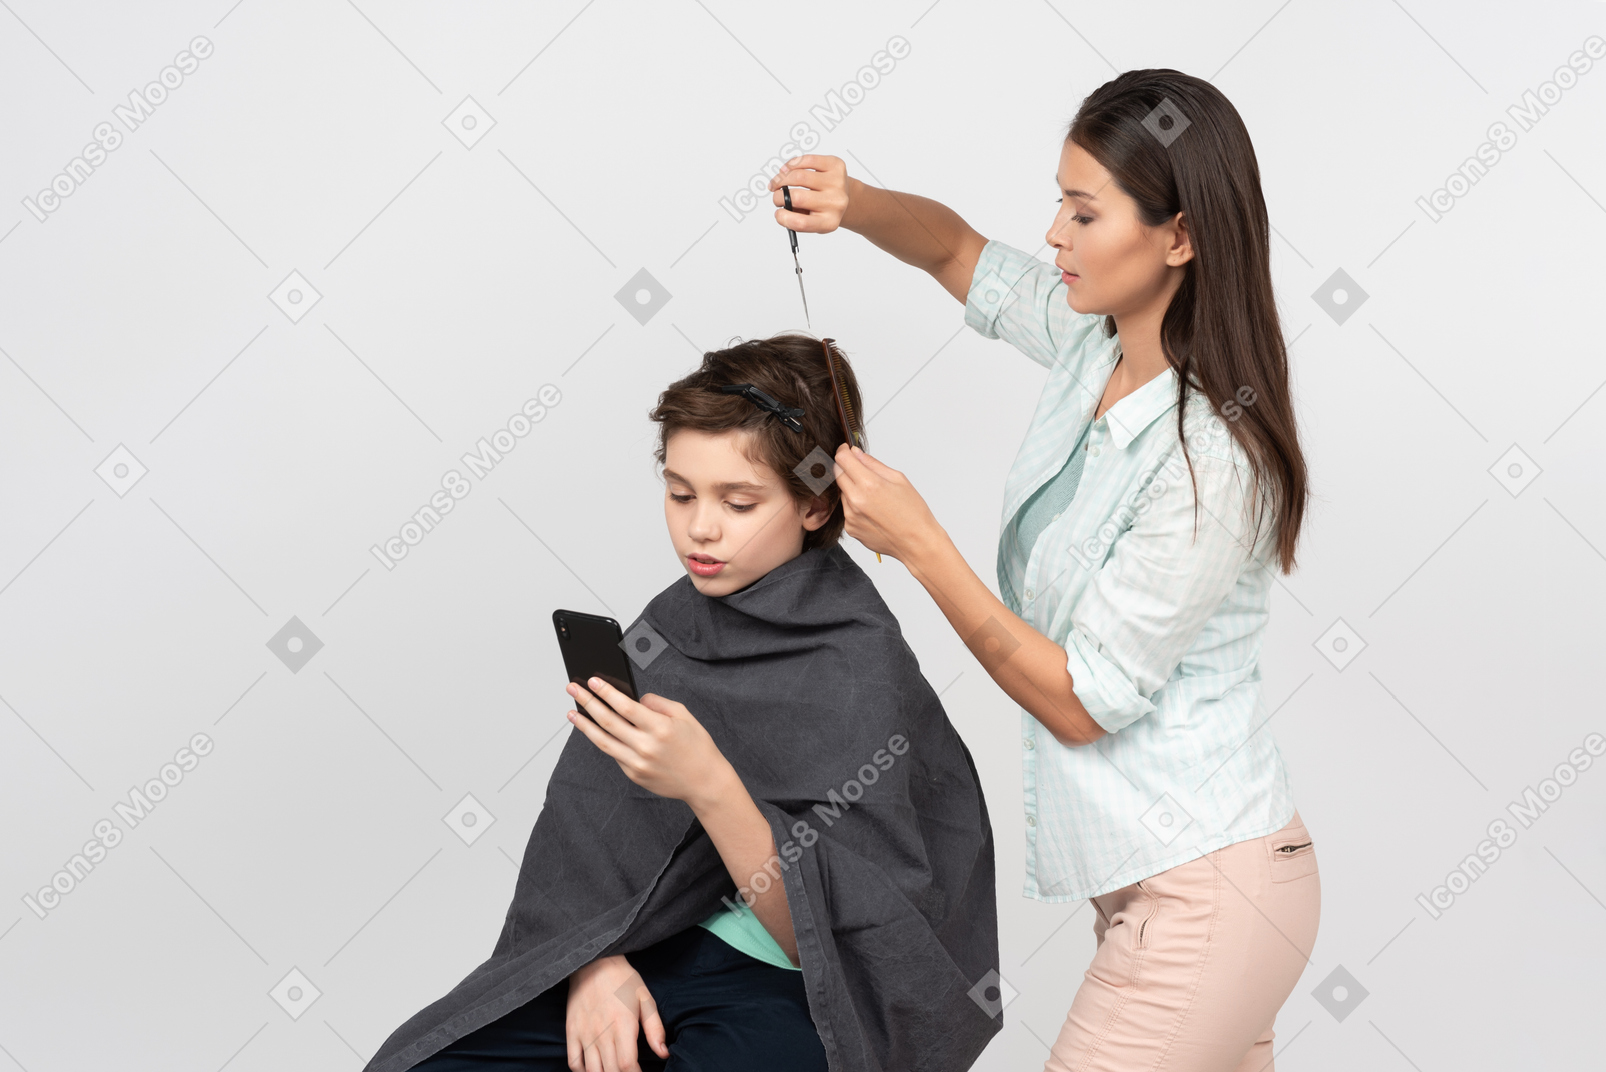 Browsing web at a hairdresser's